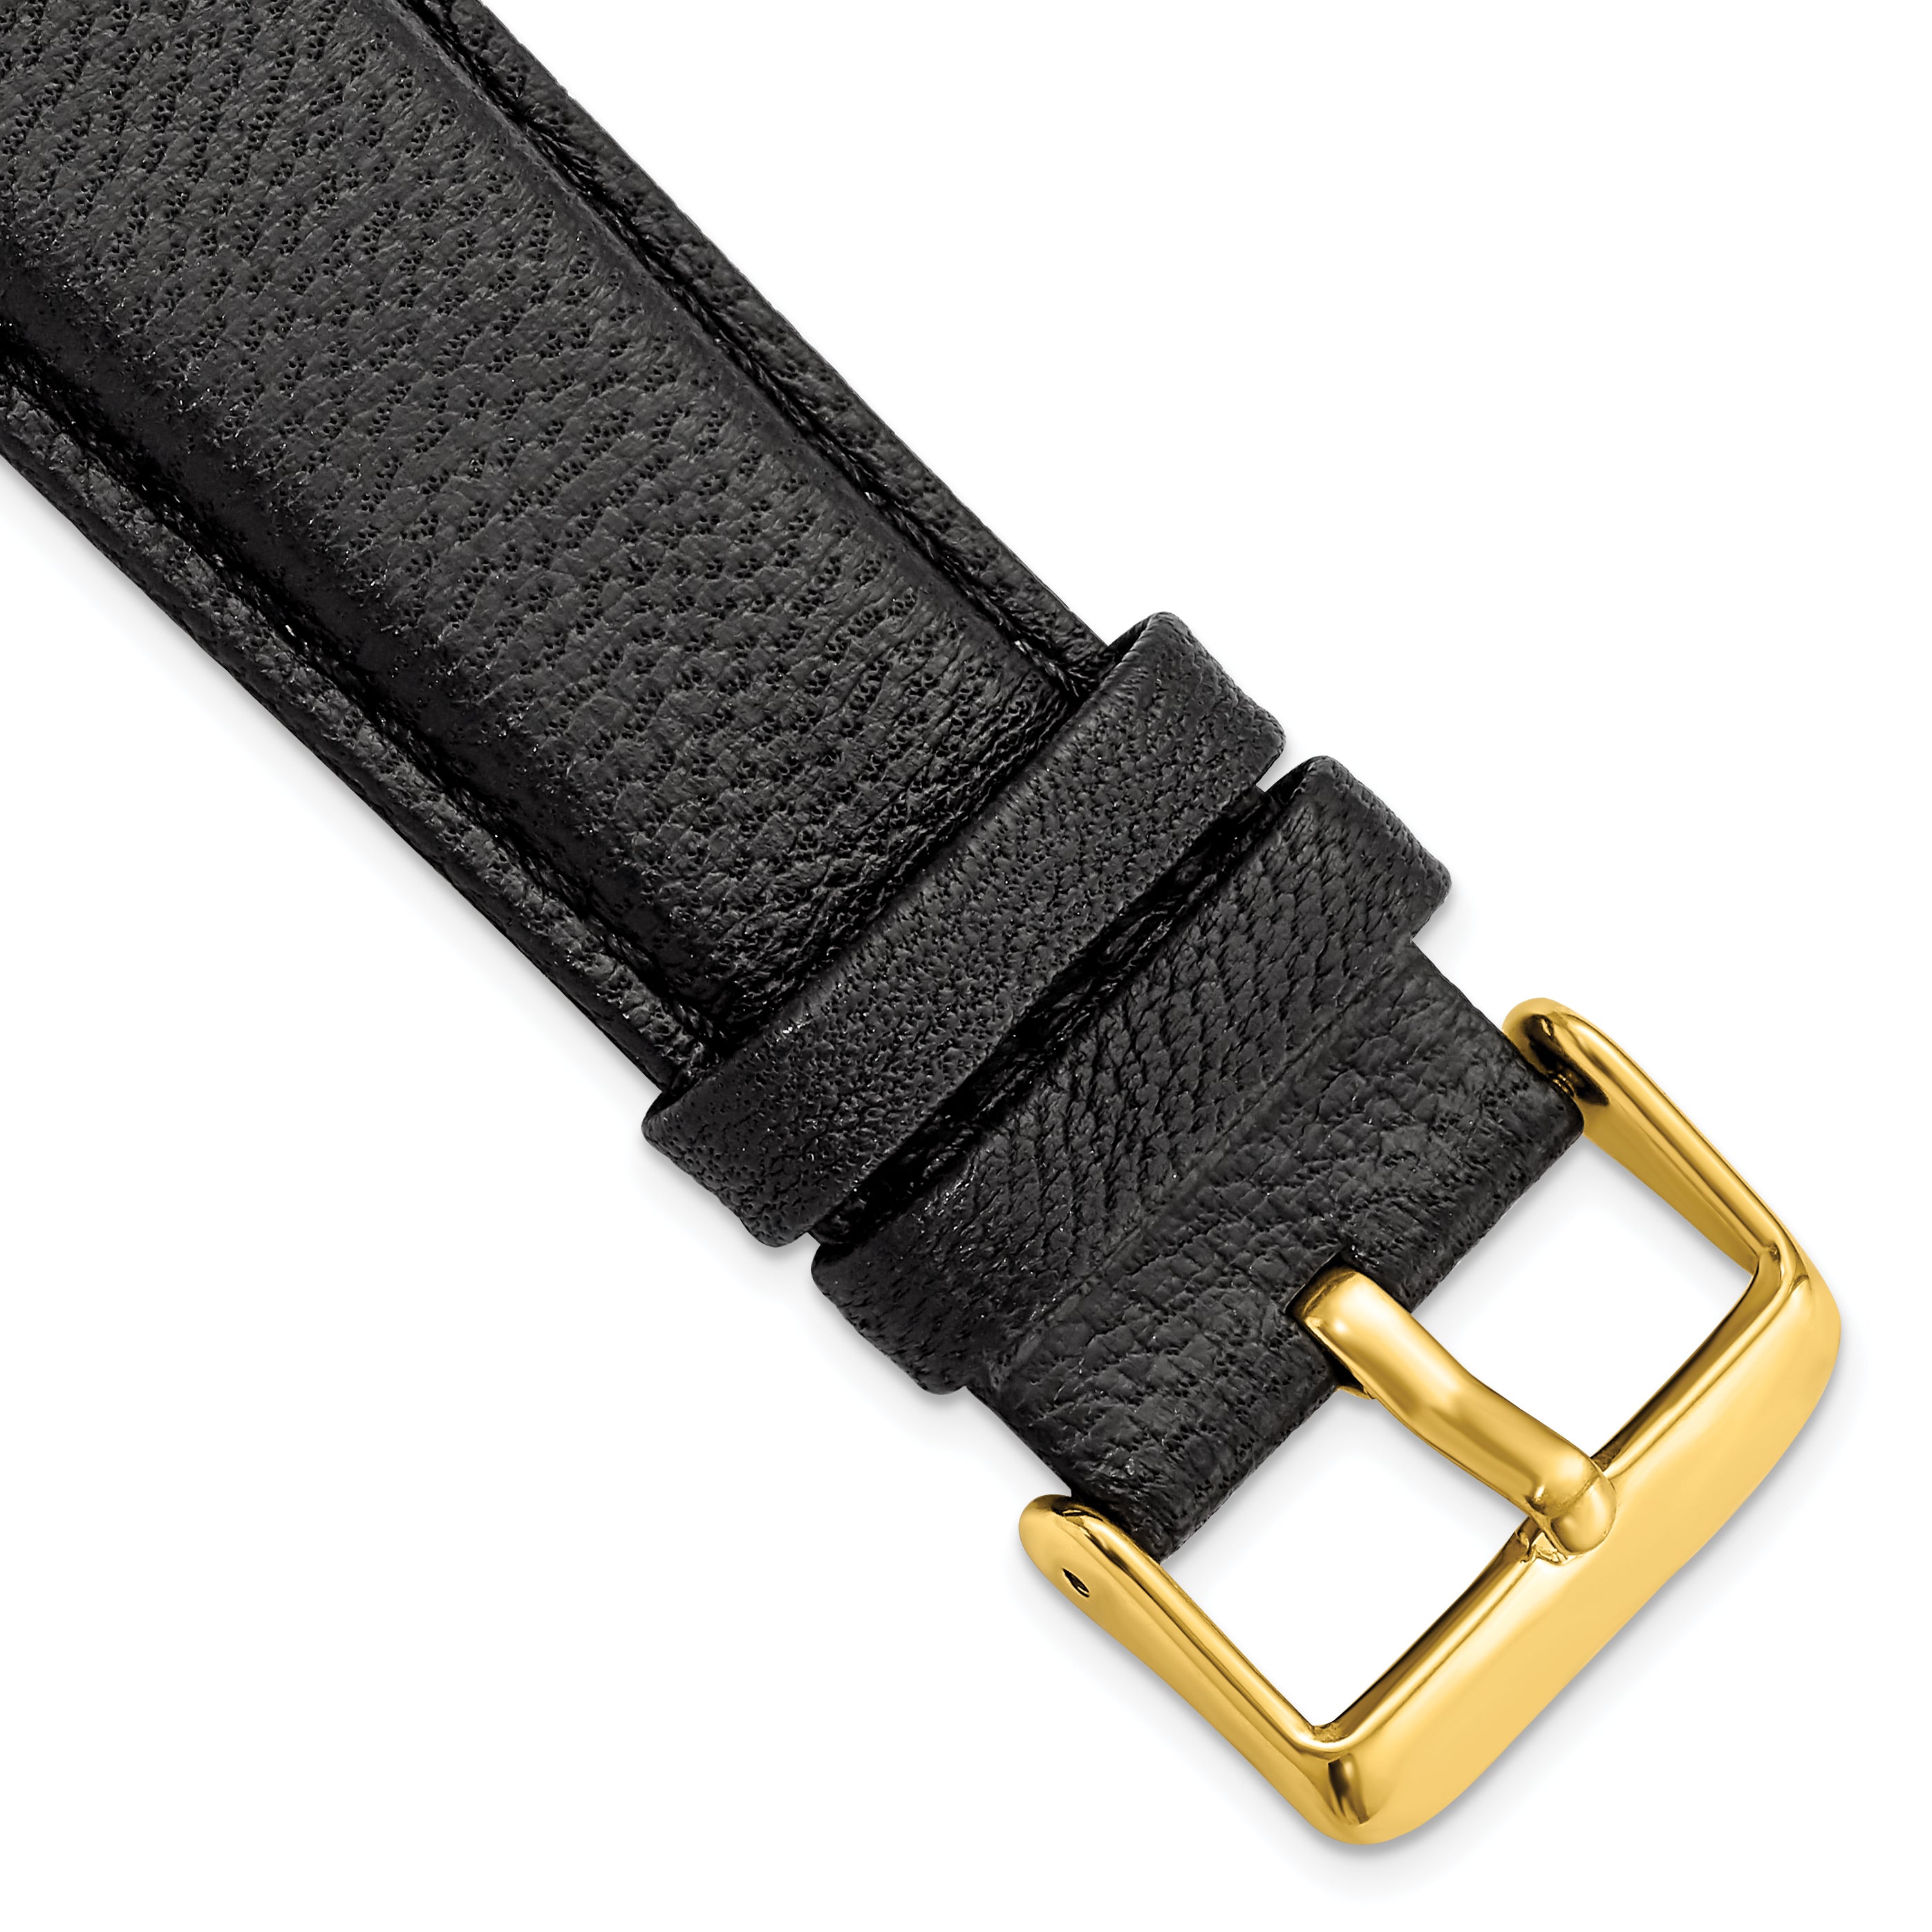 DeBeer 24mm Black Glove Leather with Gold-tone Panerai Style Buckle 7.75 inch Watch Band